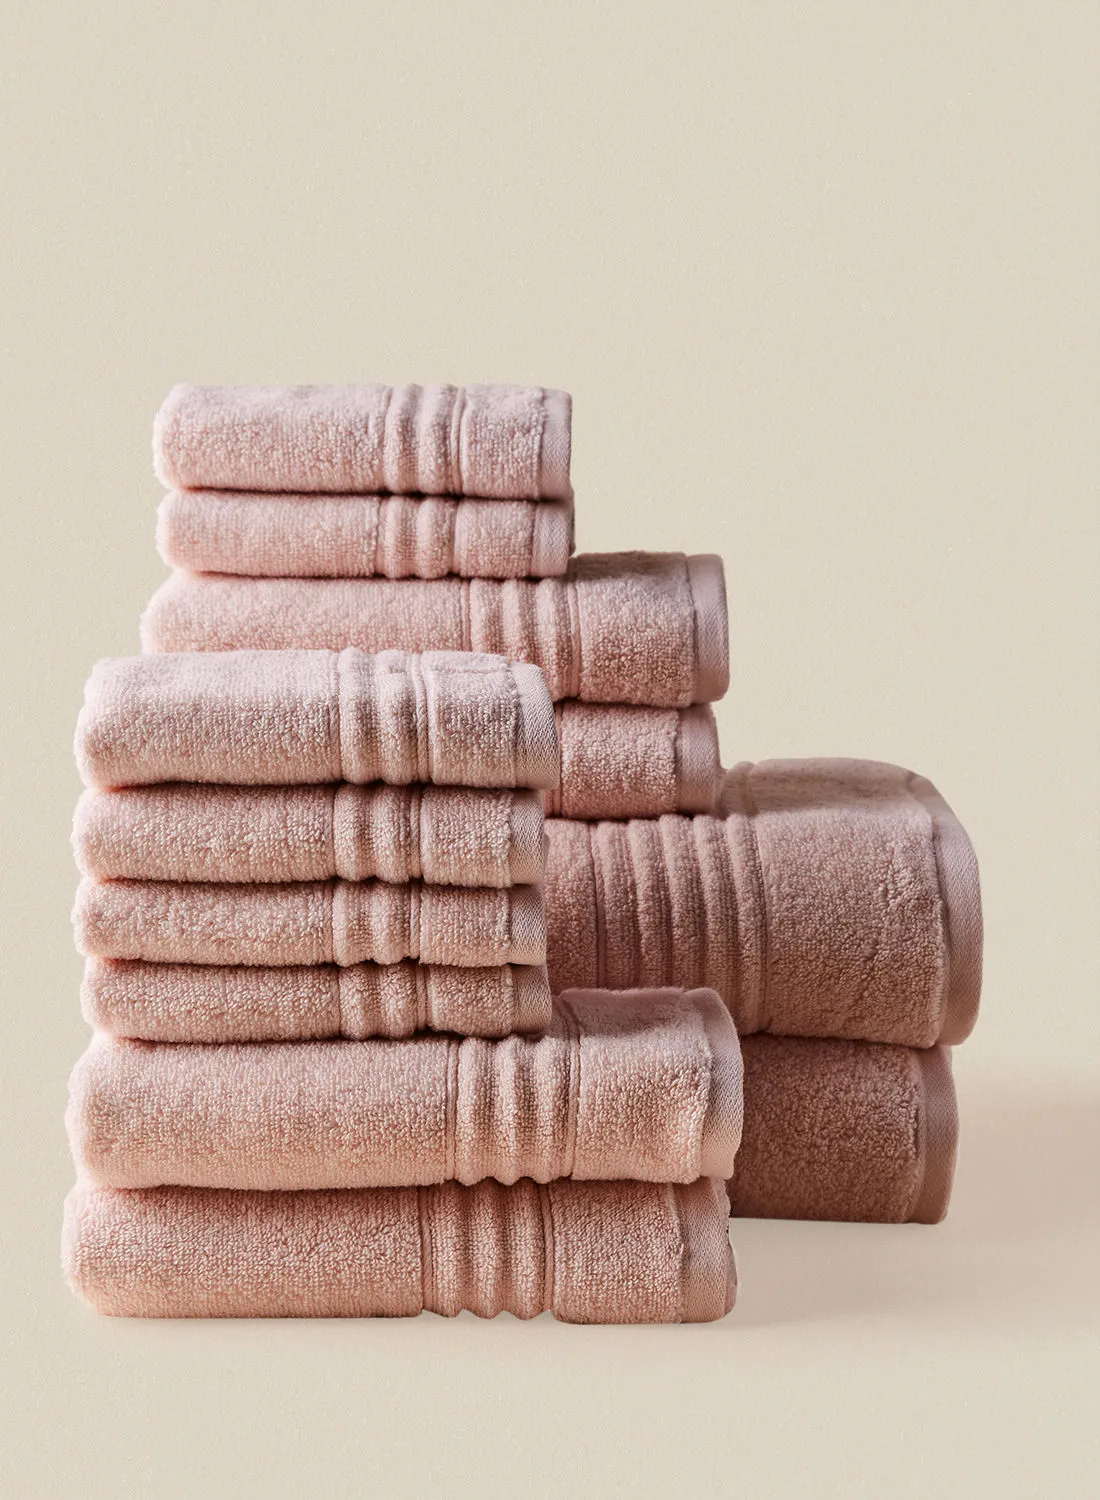 noon east 12 Piece Bathroom Towel Set - 500 GSM 100% Cotton - 4 Hand Towel - 6 Face Towel - 2 Bath Towel - Rose Color - Highly Absorbent - Fast Dry